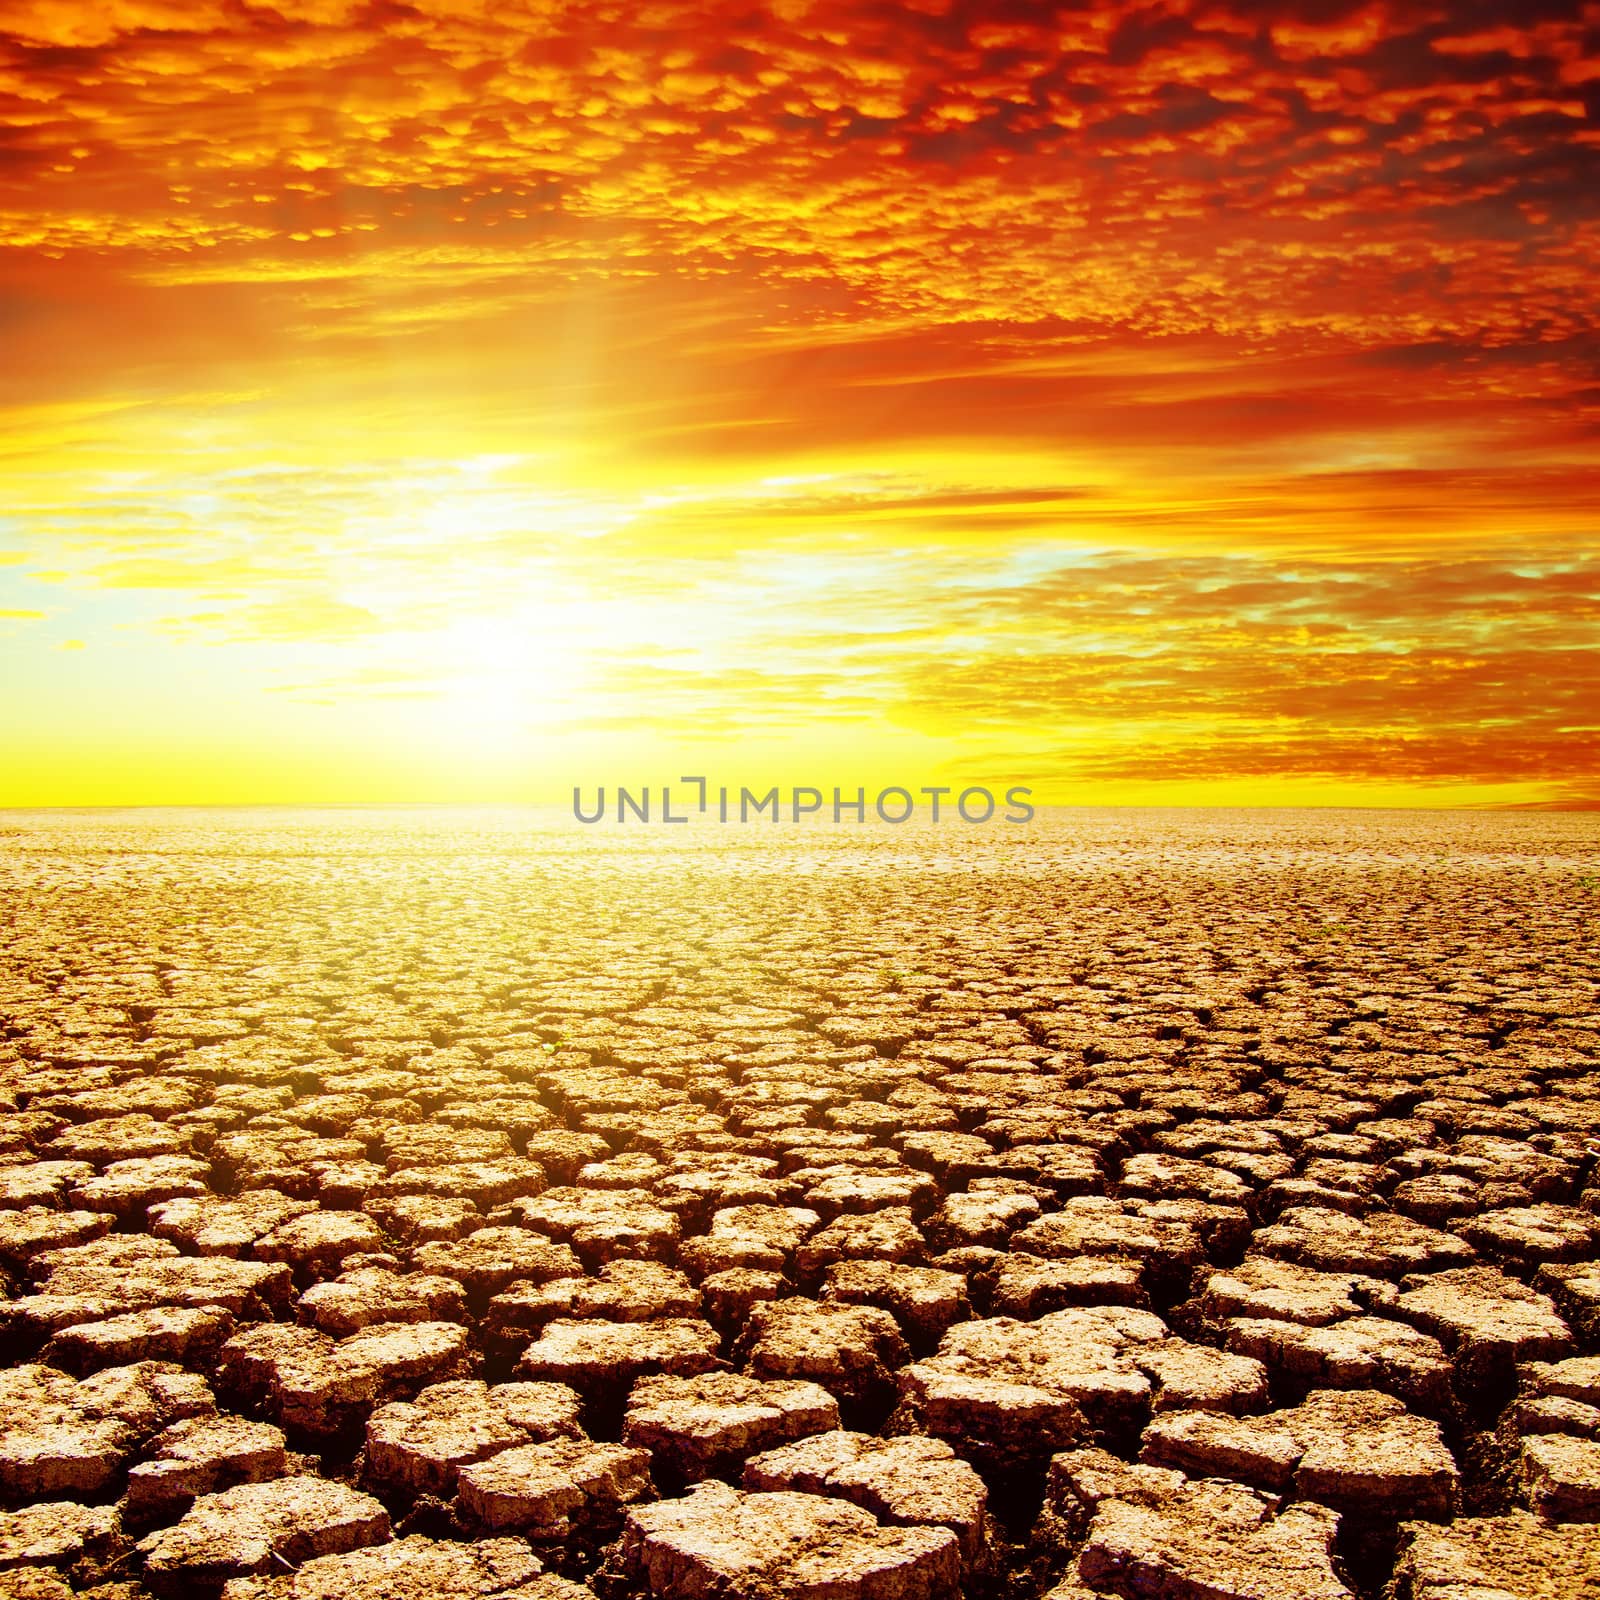 red sunset over drought earth